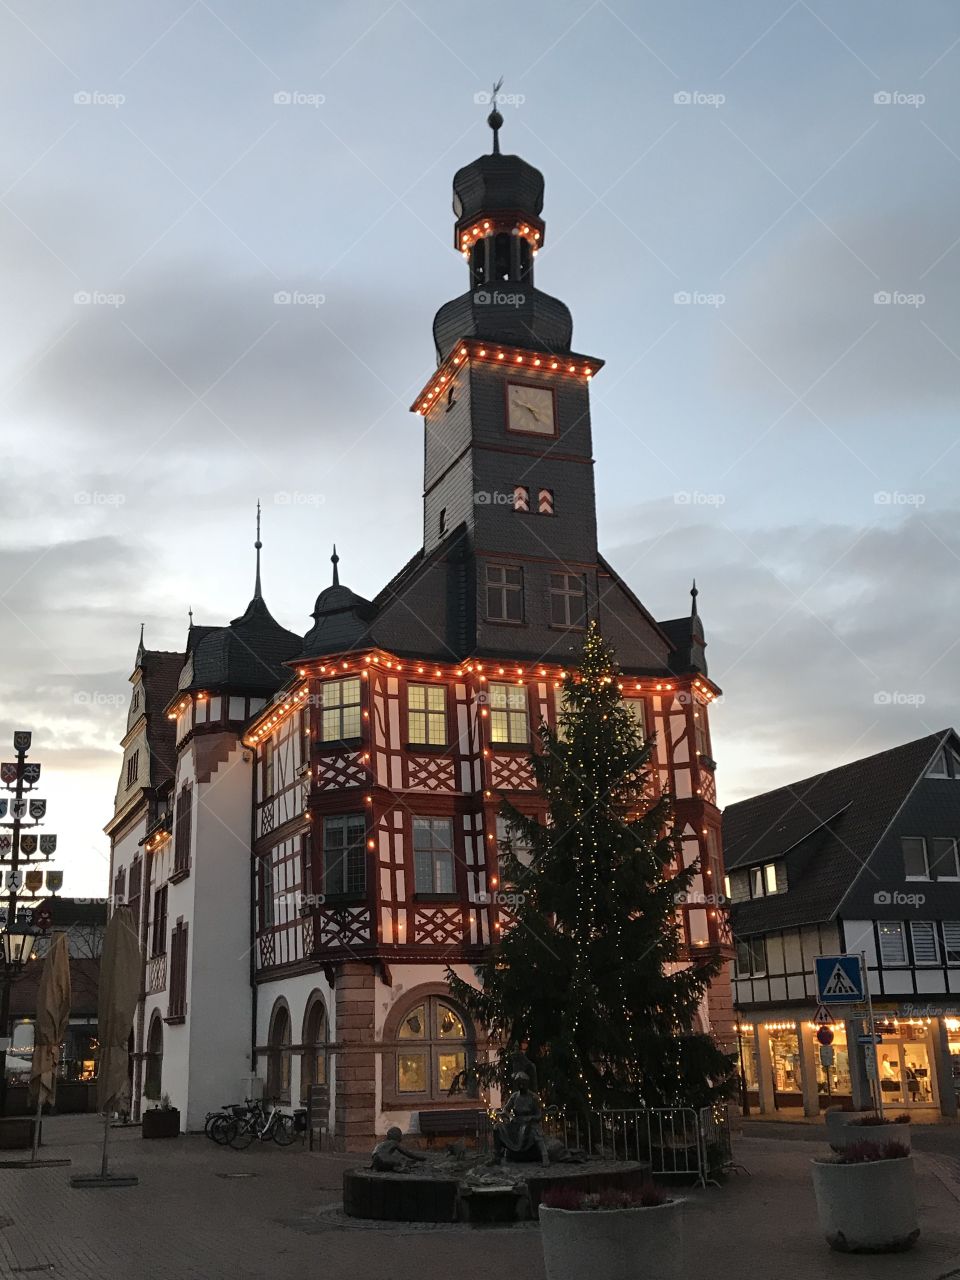 The beauty of dusk during Christmastime in Germany 